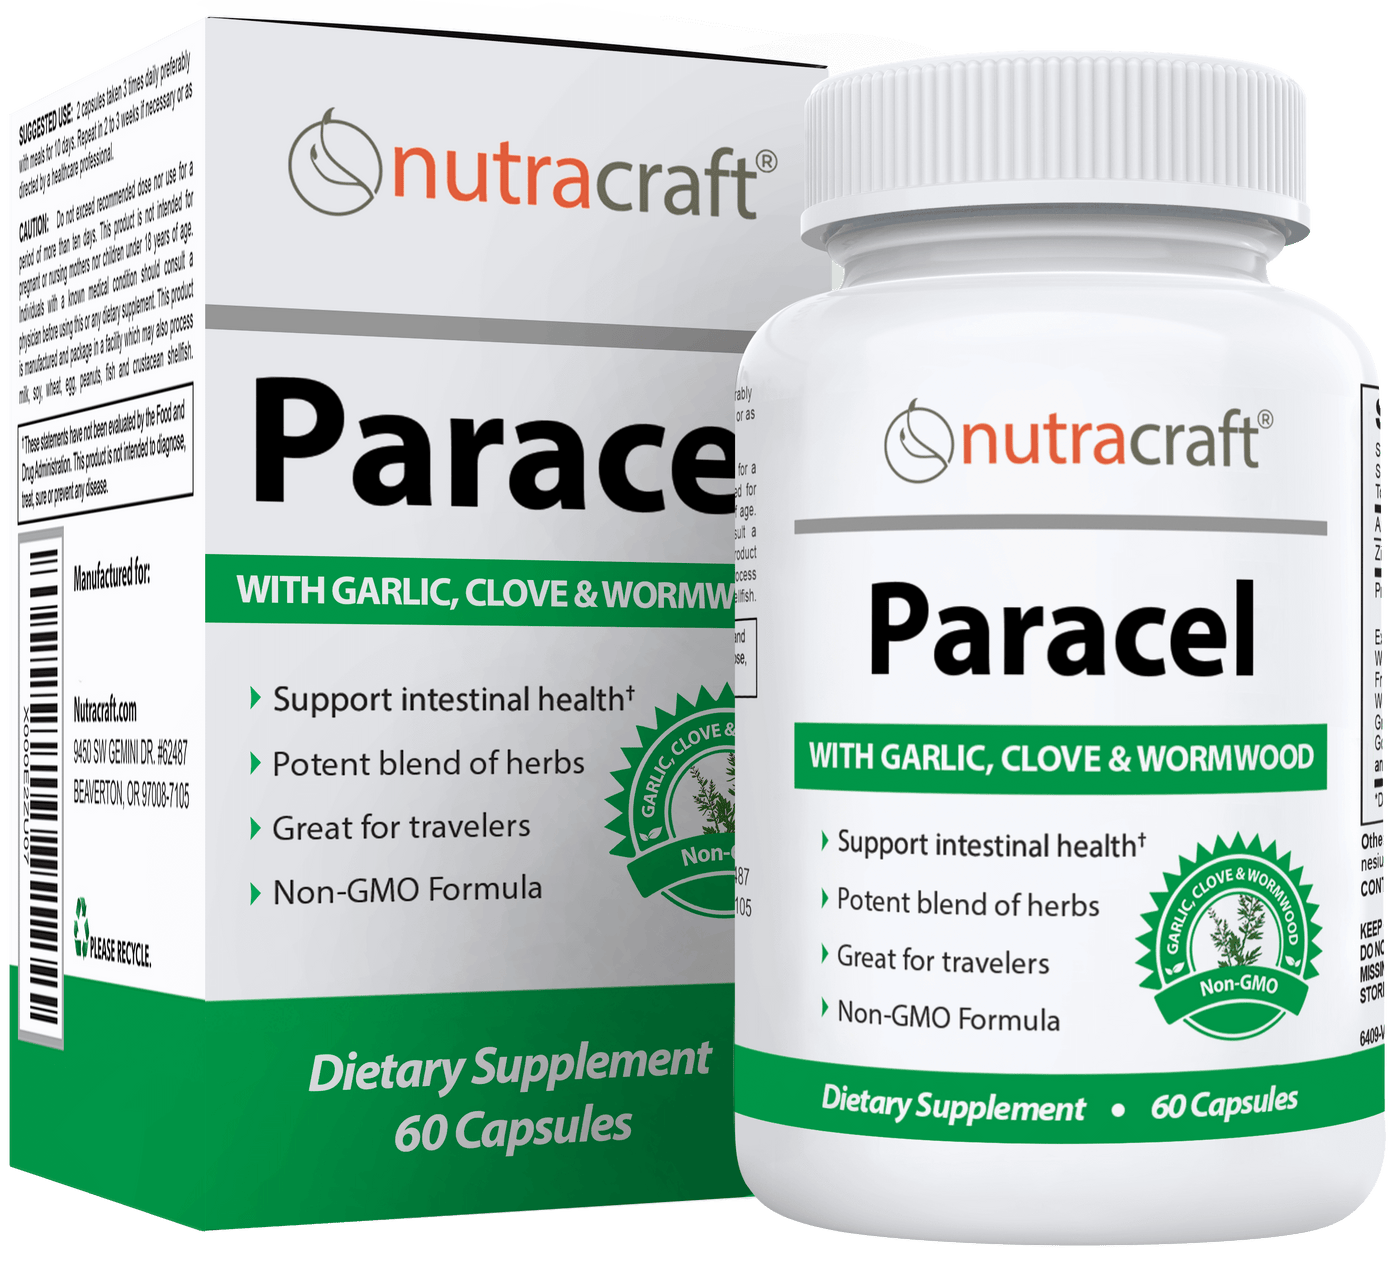 Paracel - One Time Offer - Save 20%